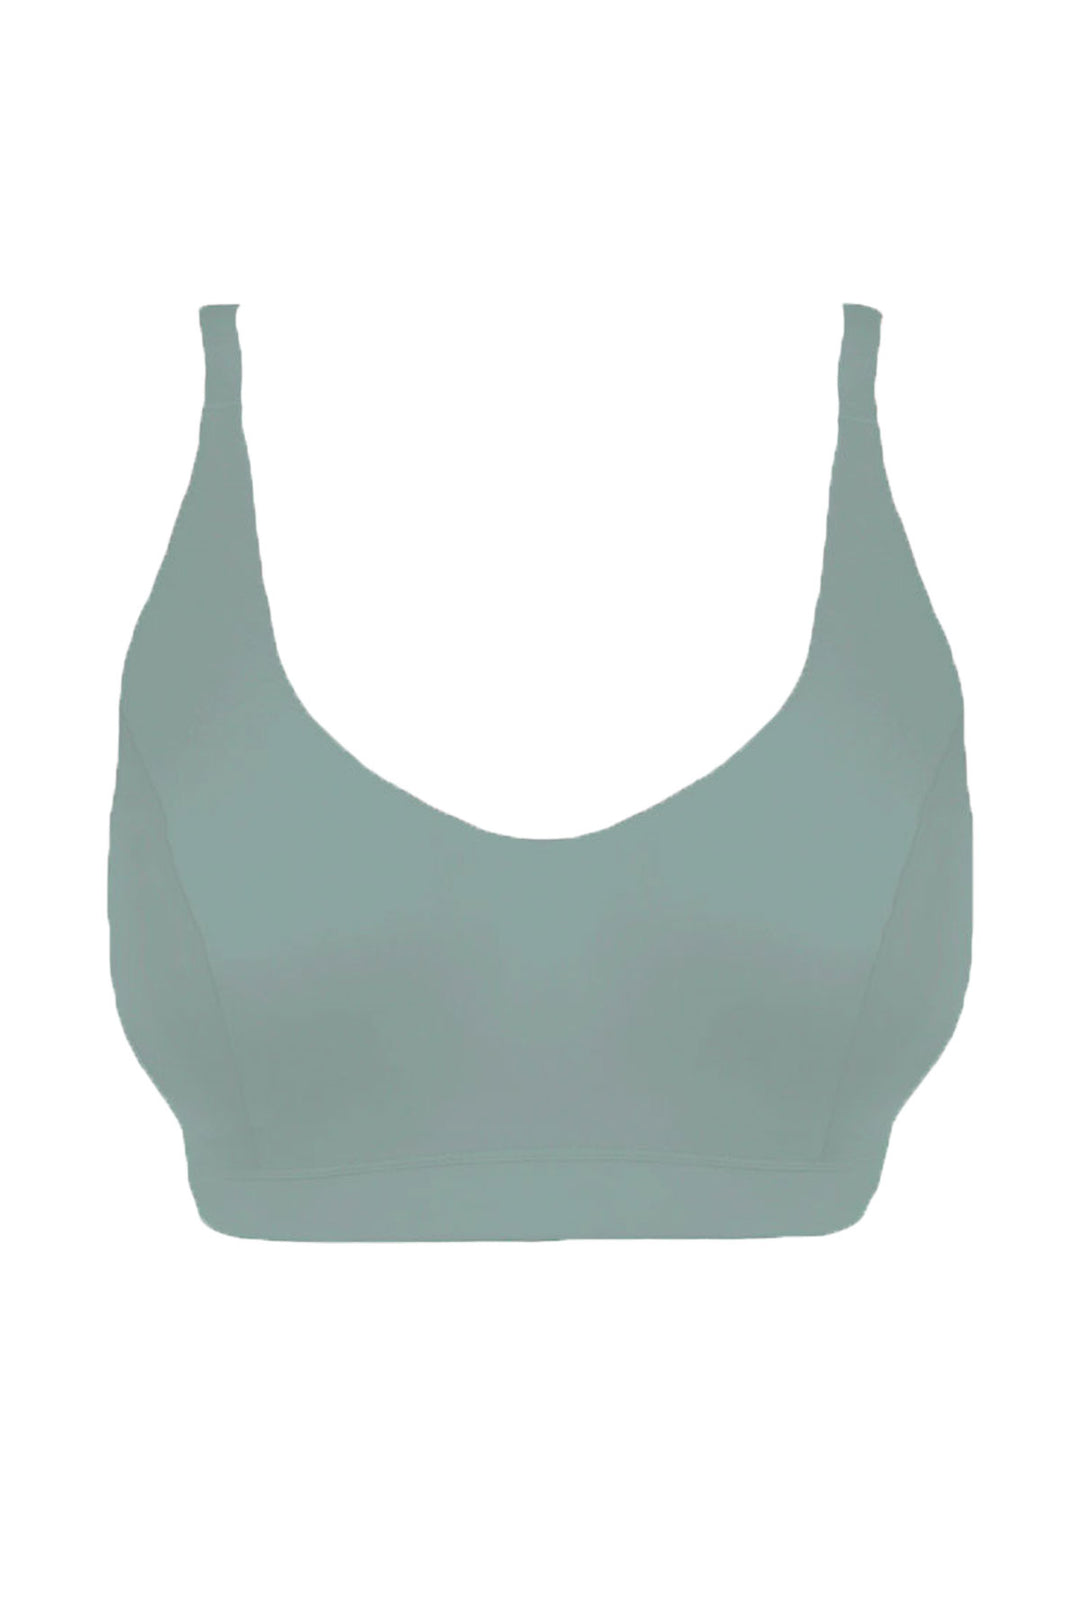 bralette for larger cups sizes in sage green